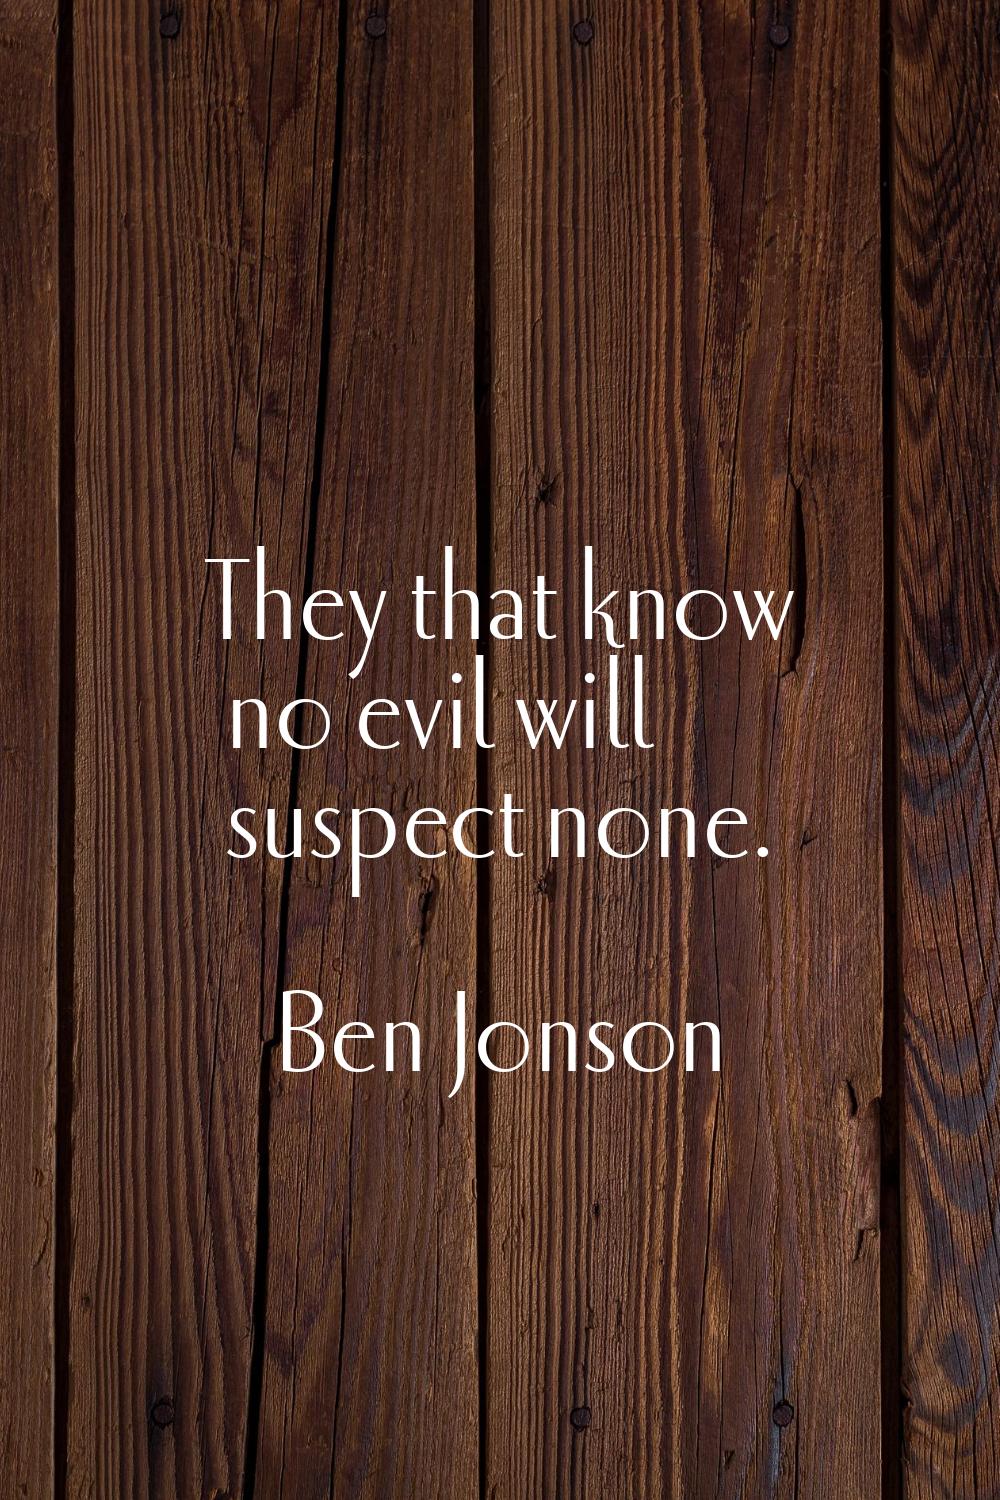 They that know no evil will suspect none.